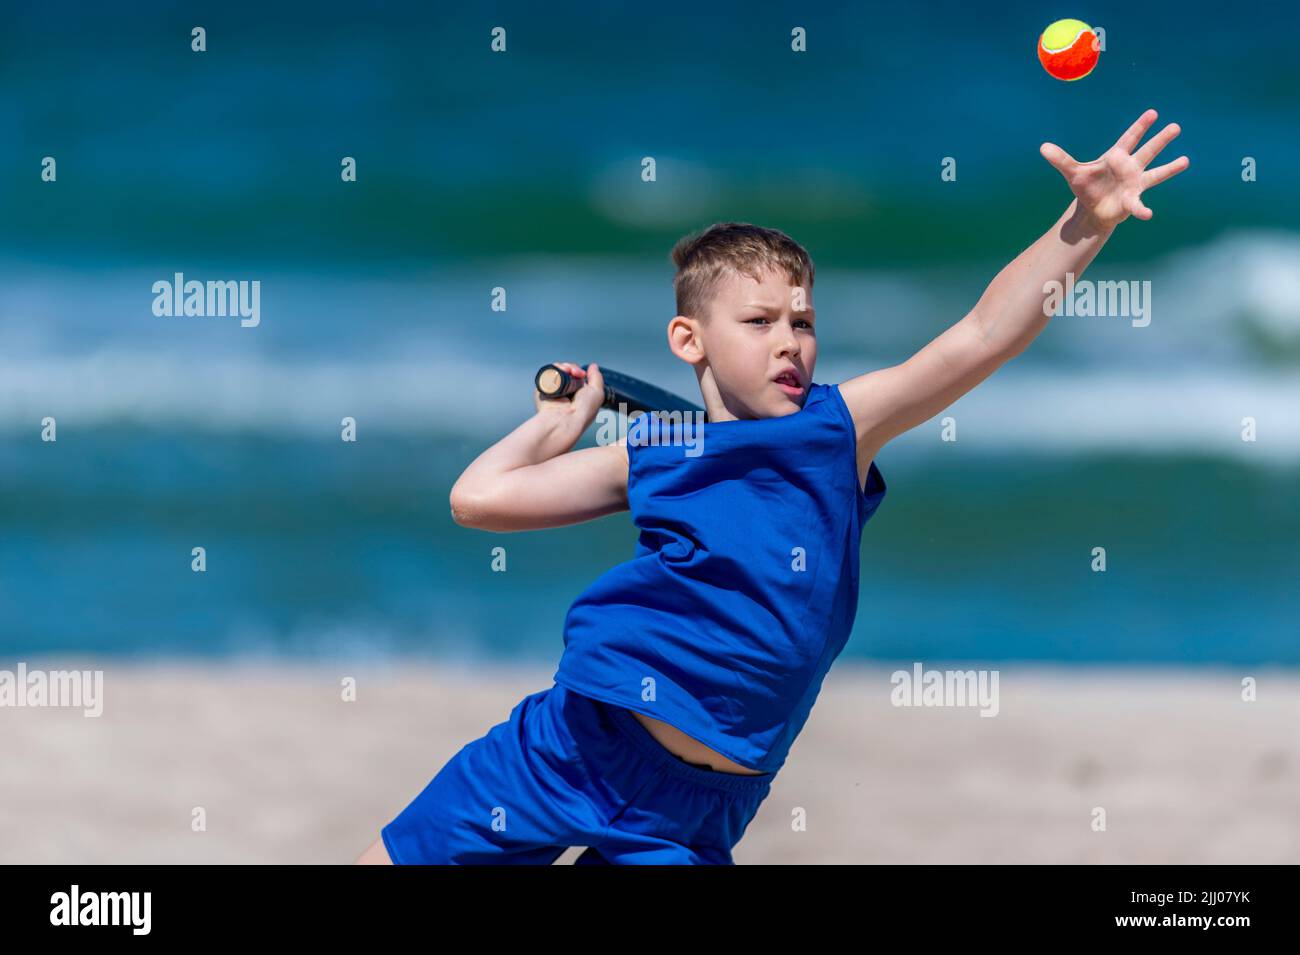 Young boy playing tennis on beach. Kids sport concept. Horizontal sport theme poster, greeting cards, headers, website and app Stock Photo